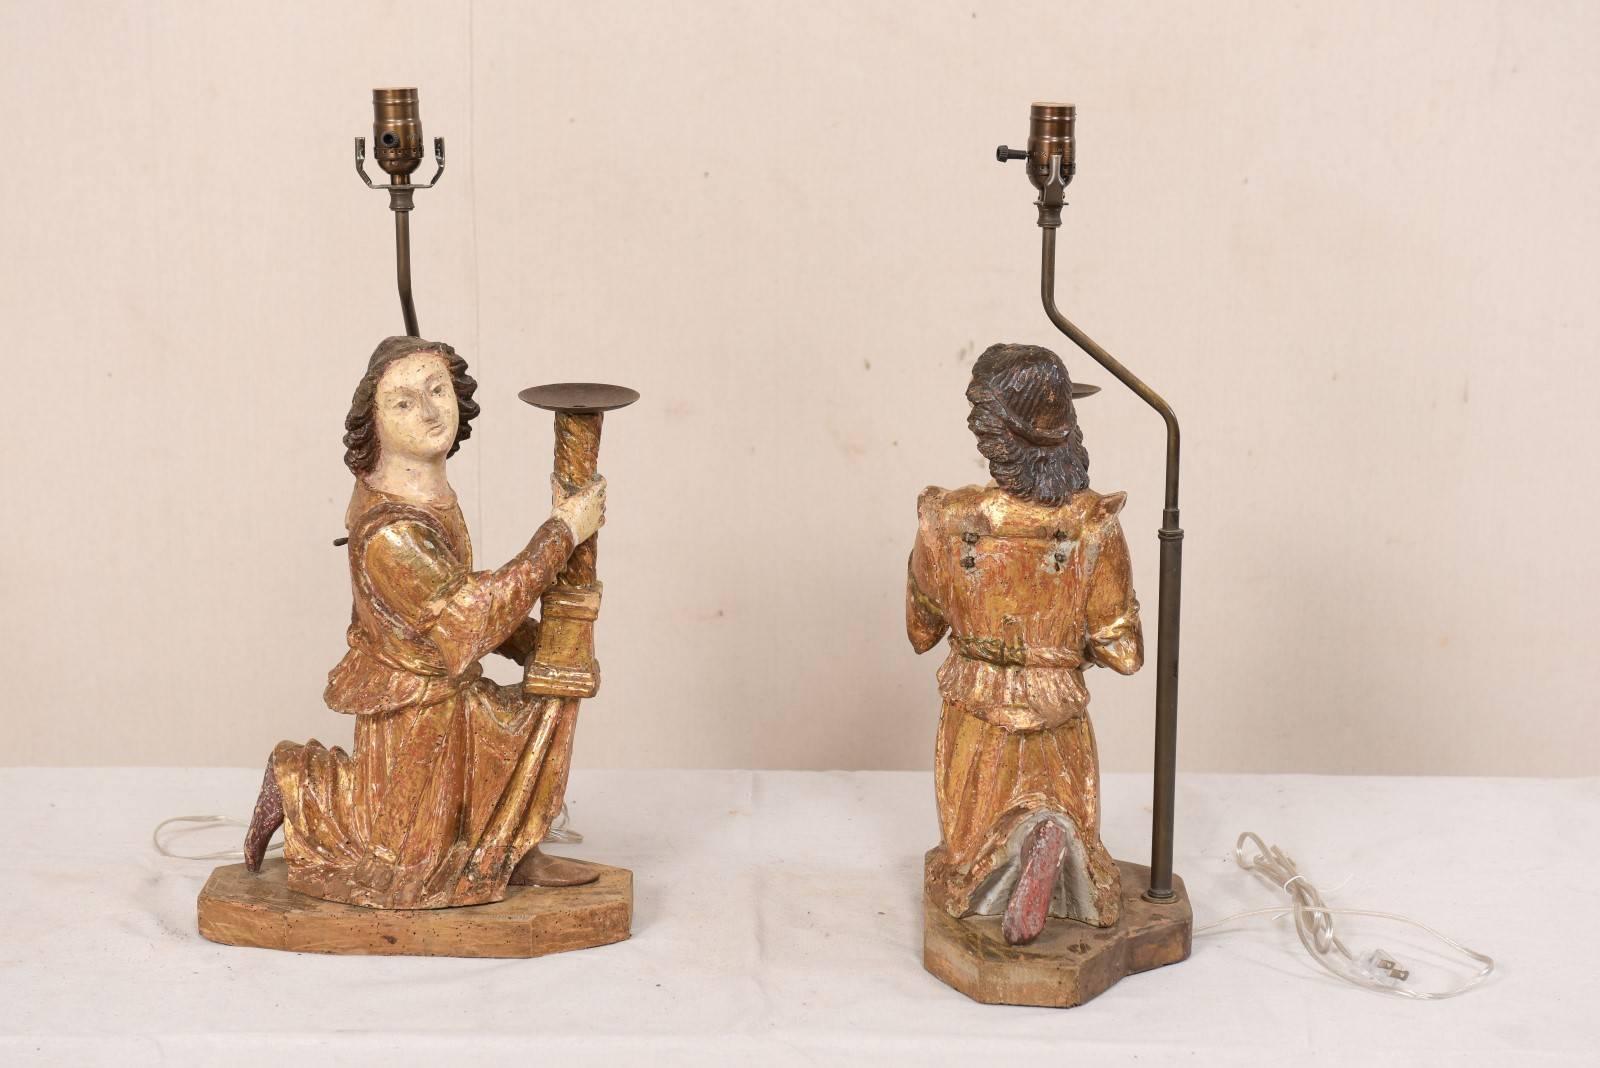 Pair of 18th Century Italian Hand-Carved and Painted Wood Figurative Table Lamps For Sale 3